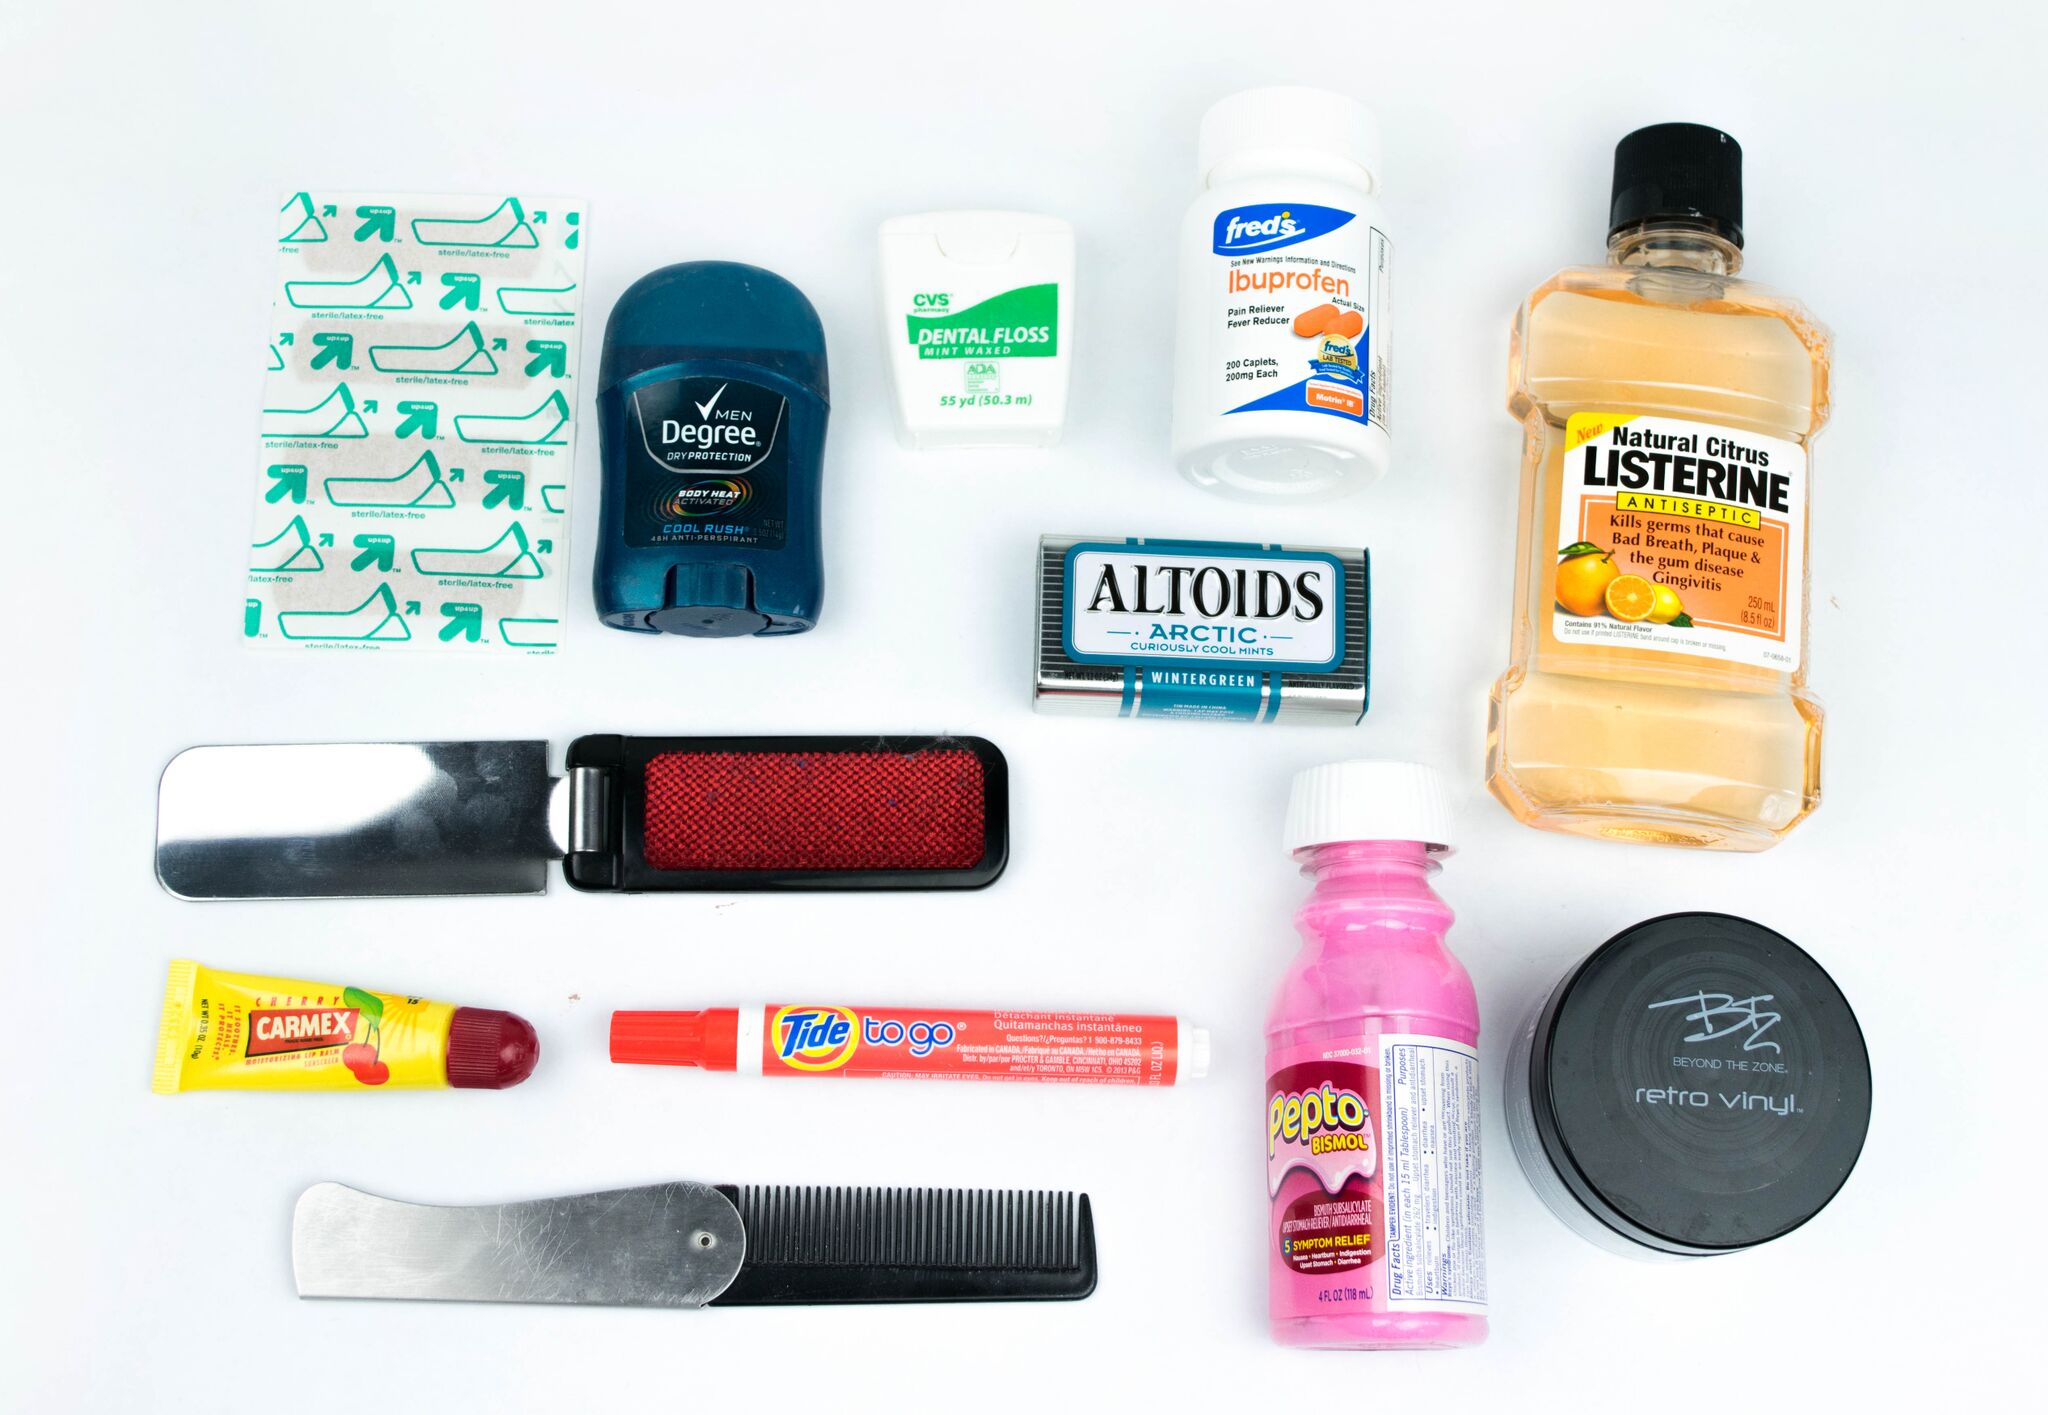 These Are the Best Bridal Emergency Kits on